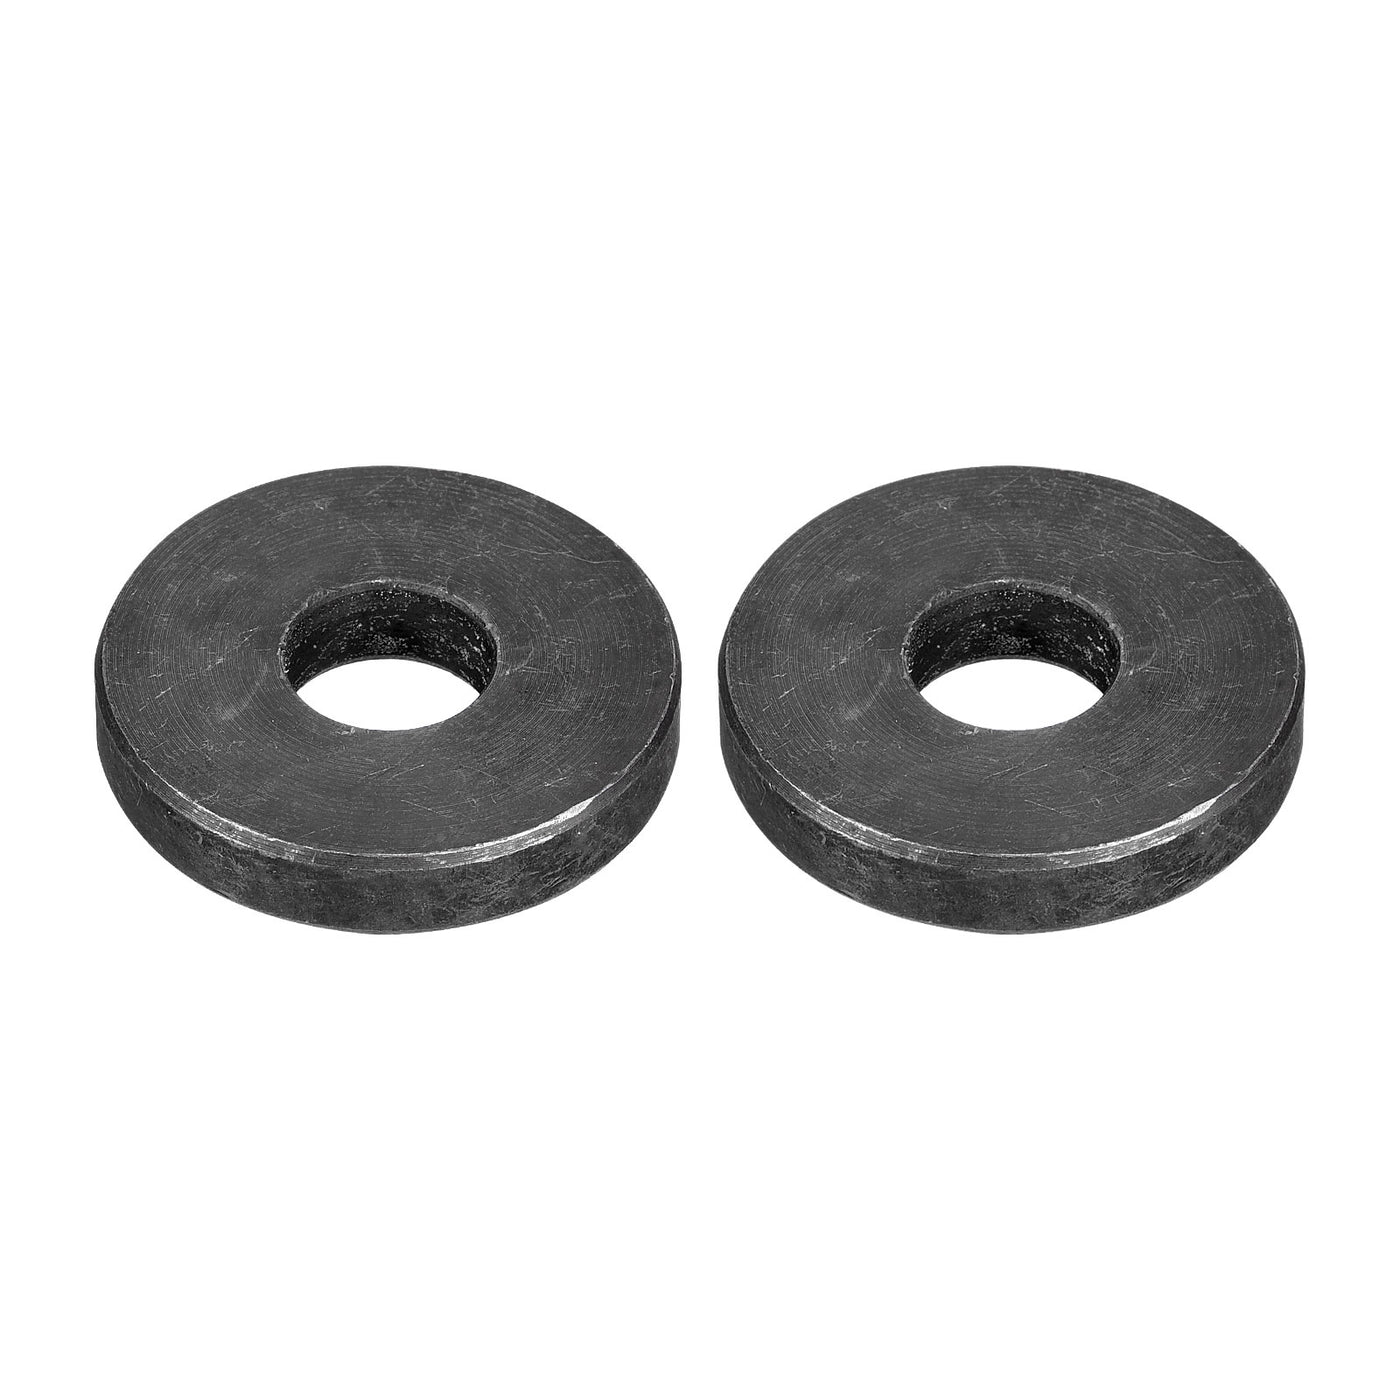 uxcell Uxcell M14 Carbon Steel Flat Washer 2pcs 14x41x7.5mm Grade 8.8 Alloy Steel Fasteners